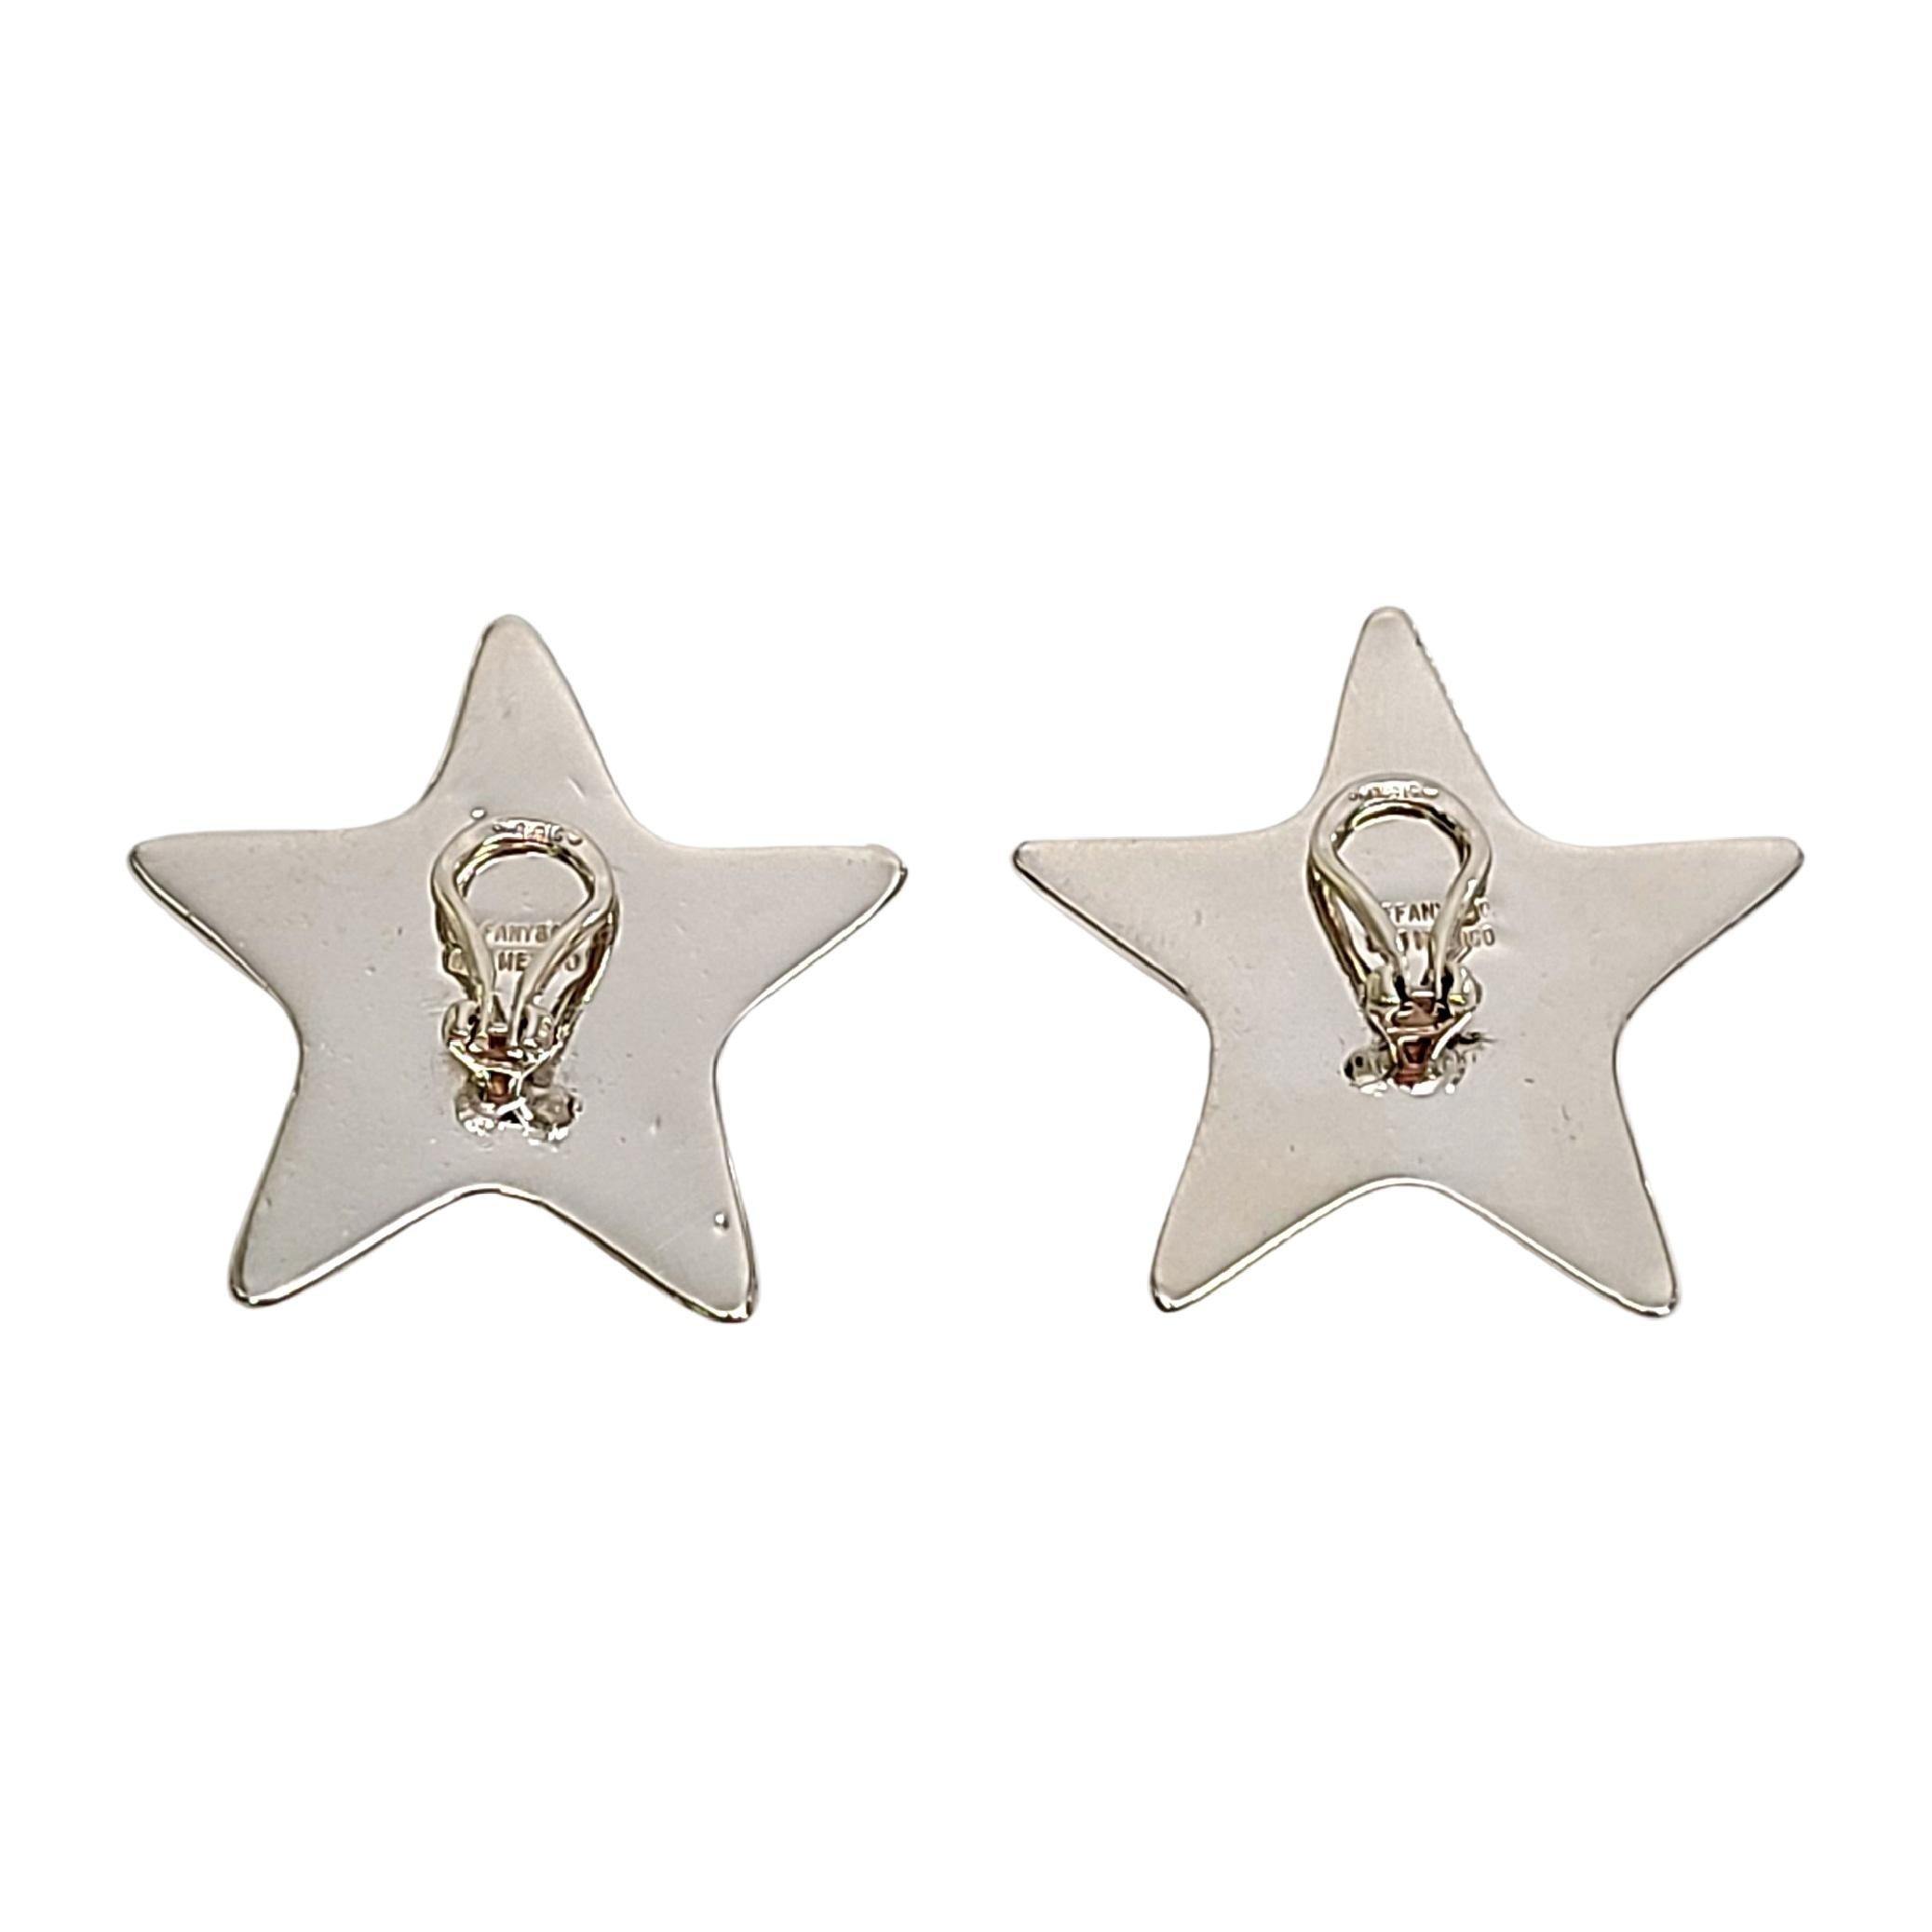 Tiffany & Co sterling silver puffy star clip-on earrings.

Authentic Tiffany clip-on earrings that make a statement with their bold design. Tiffany box and pouch are not included.

Measures approx 1 3/8